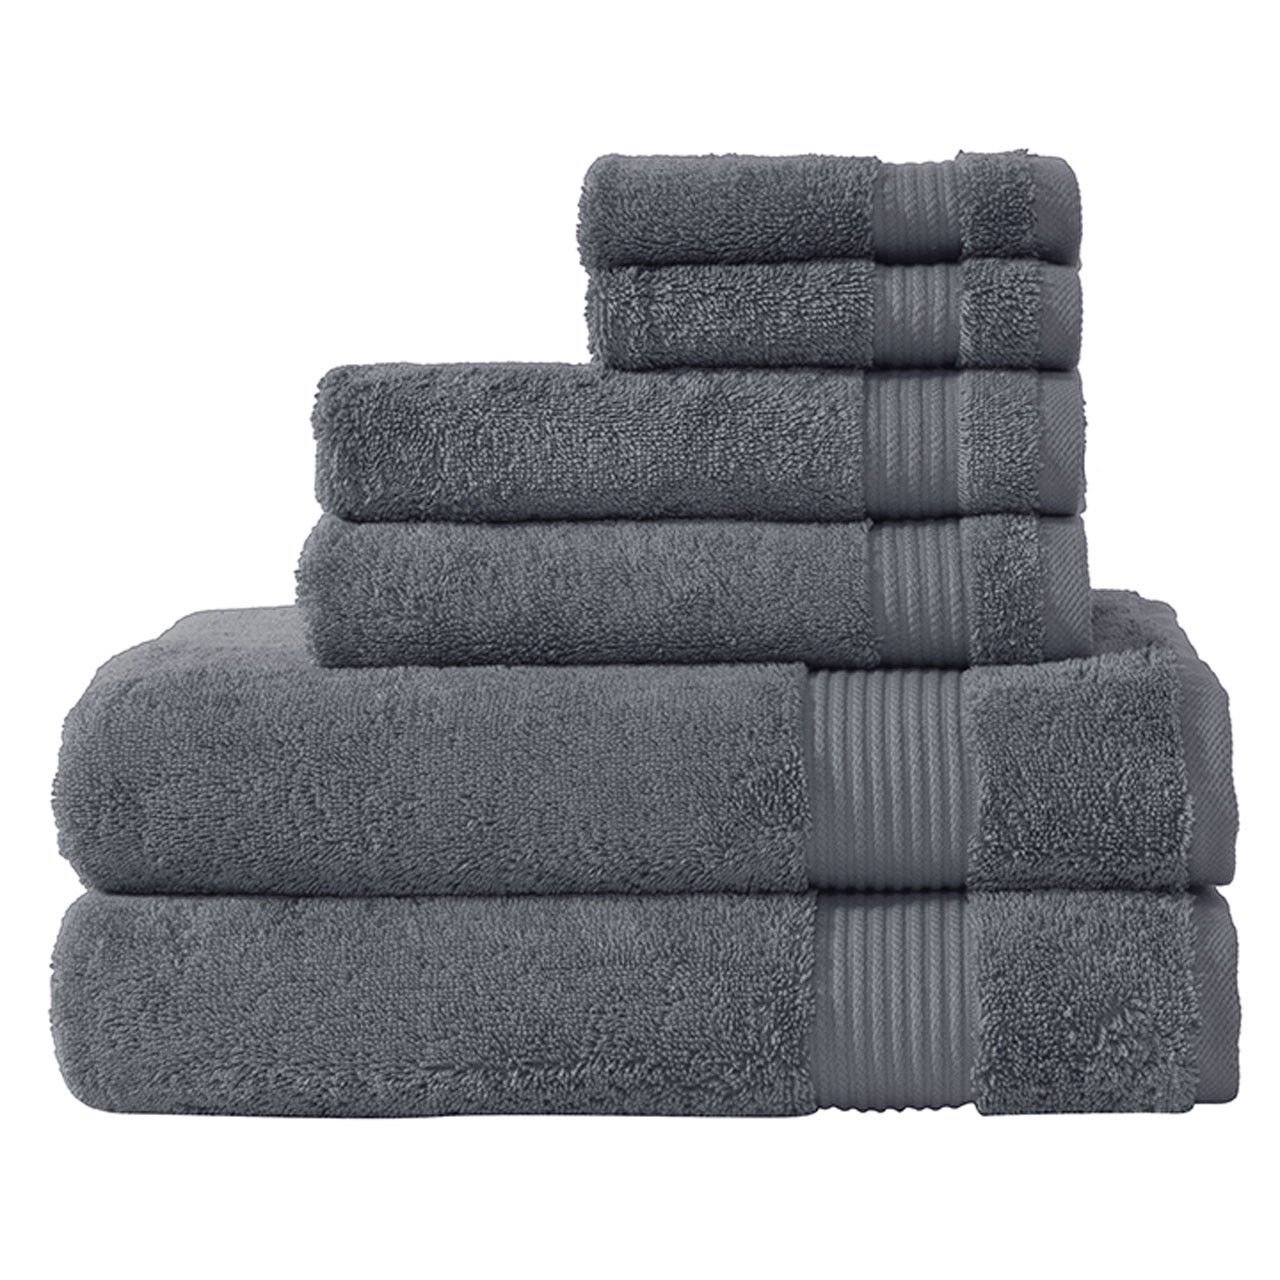 In which country are the gray towels from the Amadeus Turkish Gray Towel Collection produced?